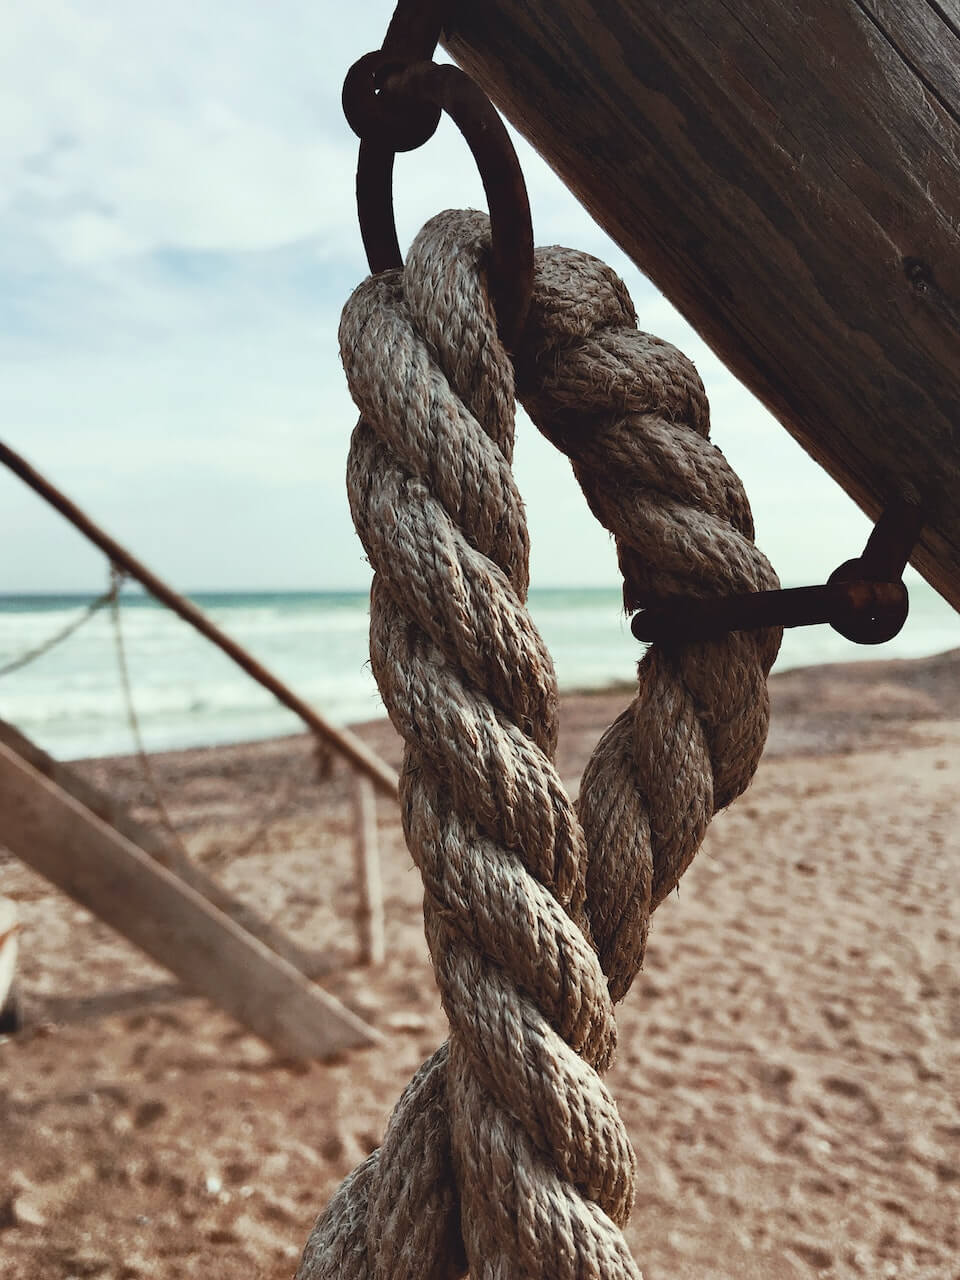 Rope hanging from a wooden pole on the beach.